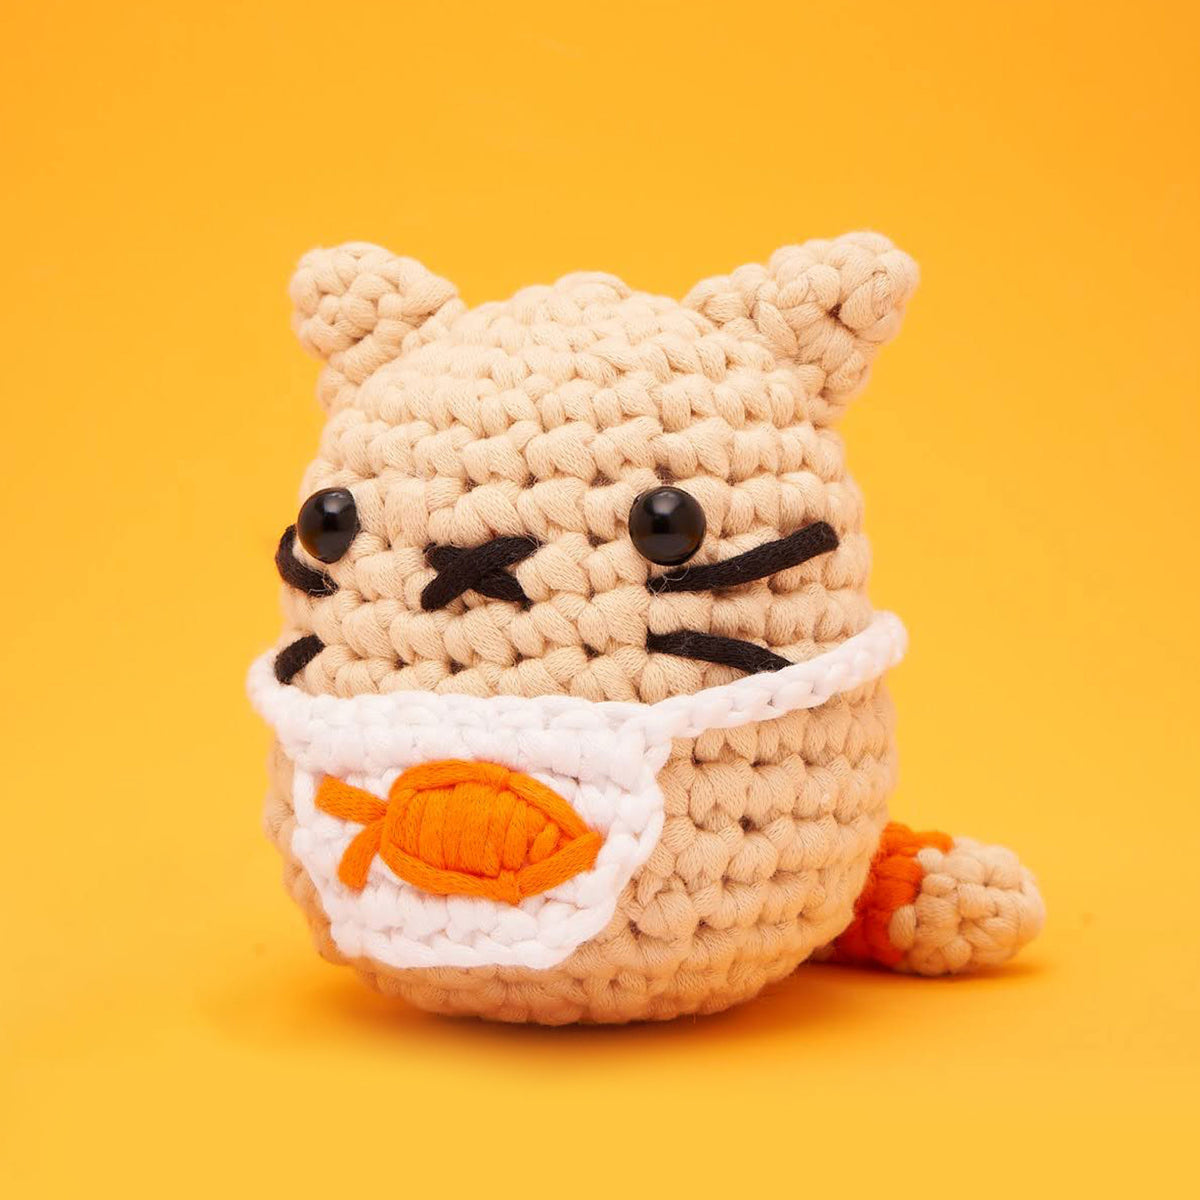 Kawaii Crochet Kit: Includes Everything you Need to Get Started